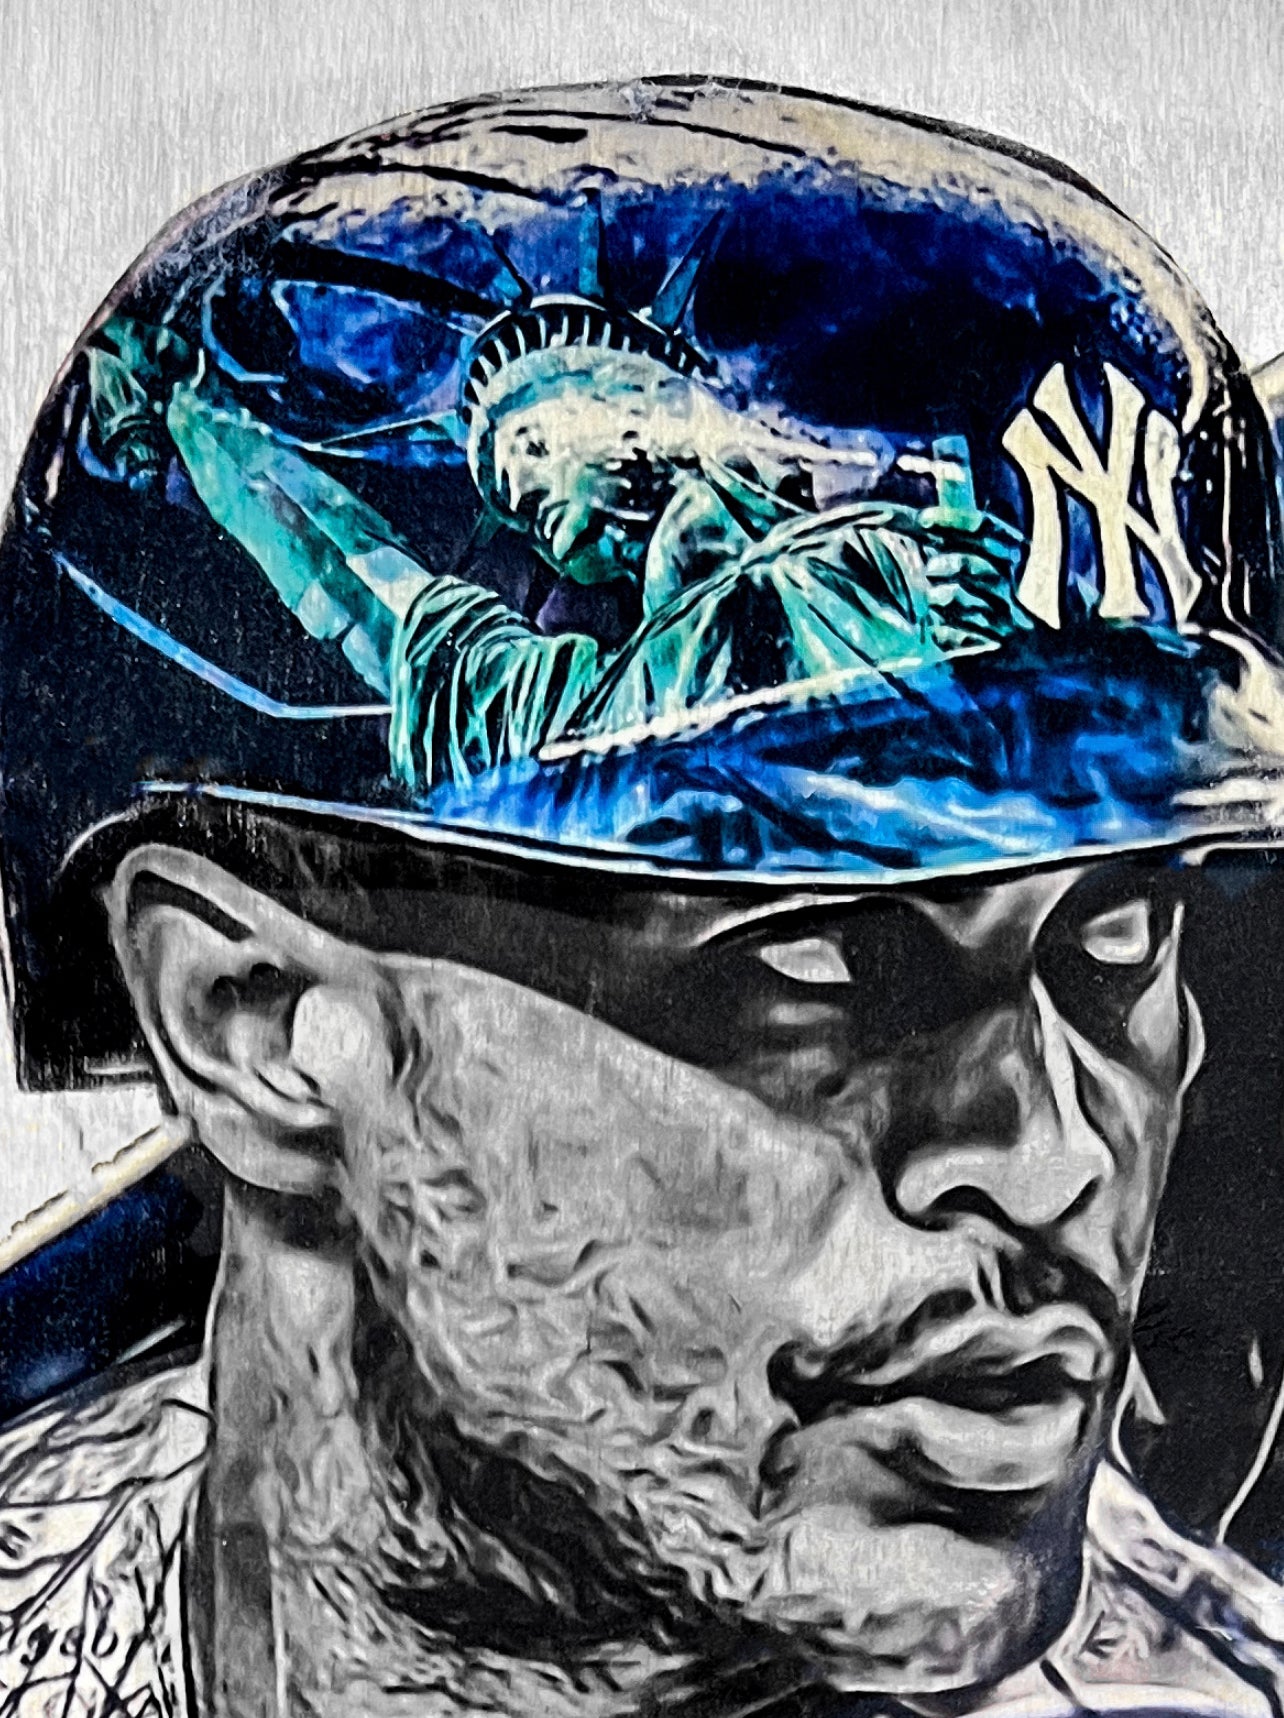 "Stanton" (Giancarlo Stanton) New York Yankees - Officially Licensed MLB Print - Limited Release /500